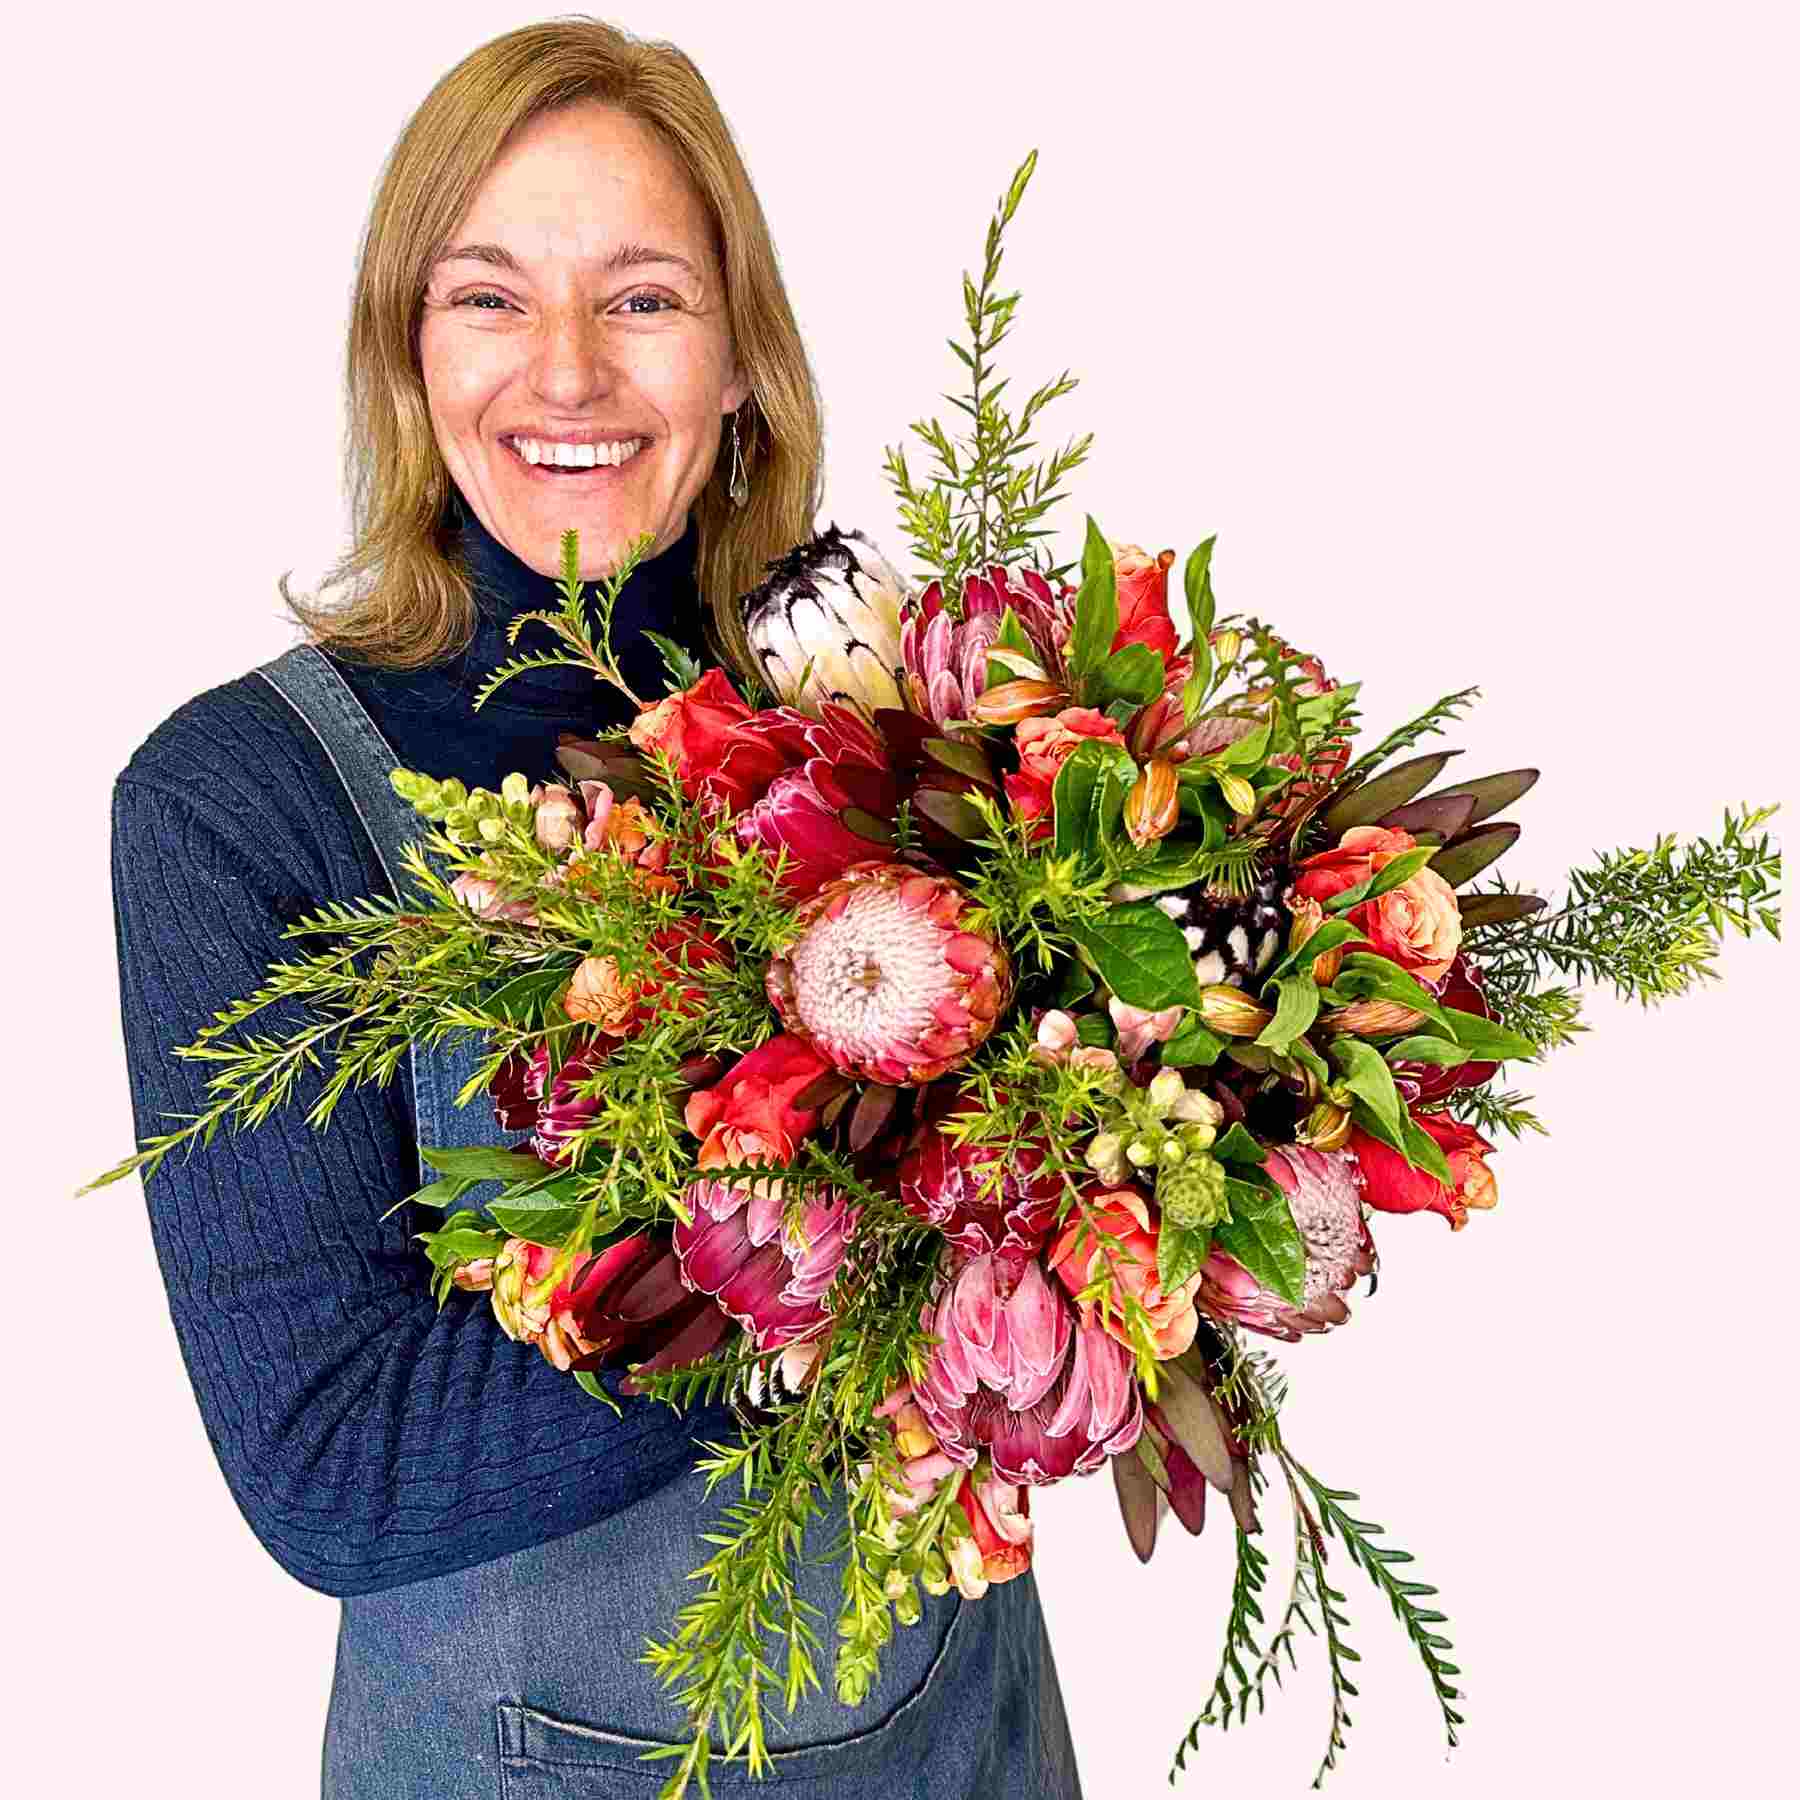 Joyful Jayne presenting her vibrant bouquet with red and pink flowers including proteas, named Jayne's Flower Bouquet from Fabulous Flowers and Gifts.